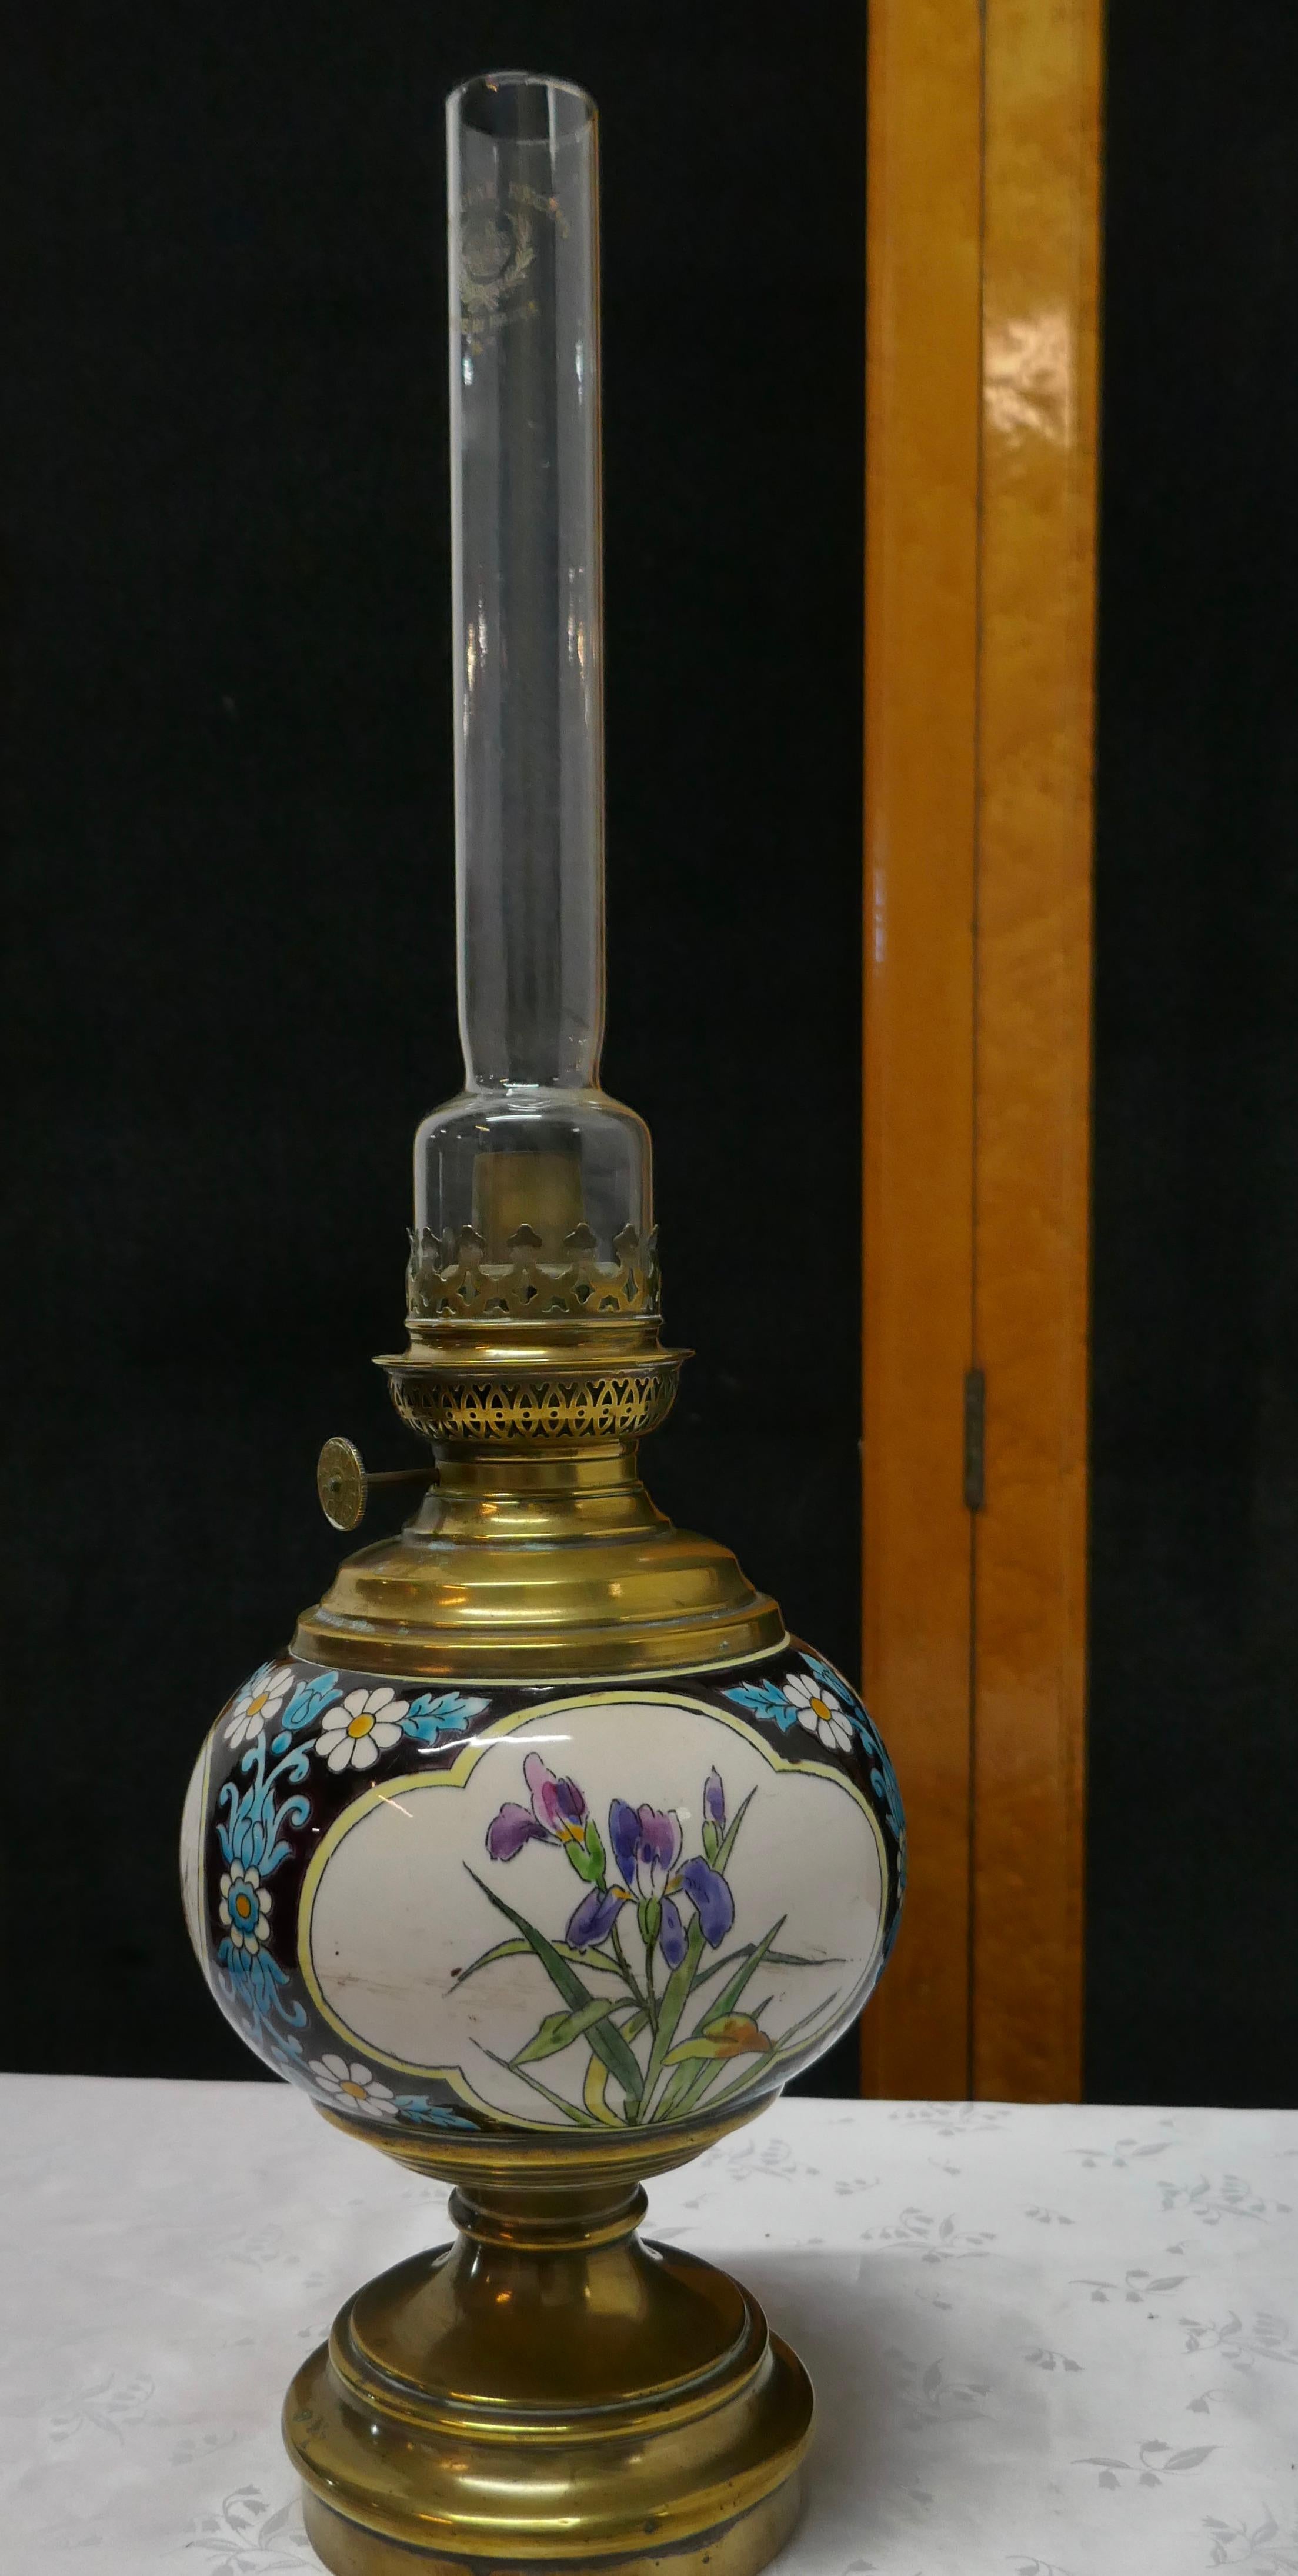 French Napoleon III ceramic oil lamp decorated with birds and flowers

A beautiful ceramic lamp set on a brass base, the lamp has colorful enamelled decoration in relief, it has wick, burner etc. but I cannot guarantee if these are in working